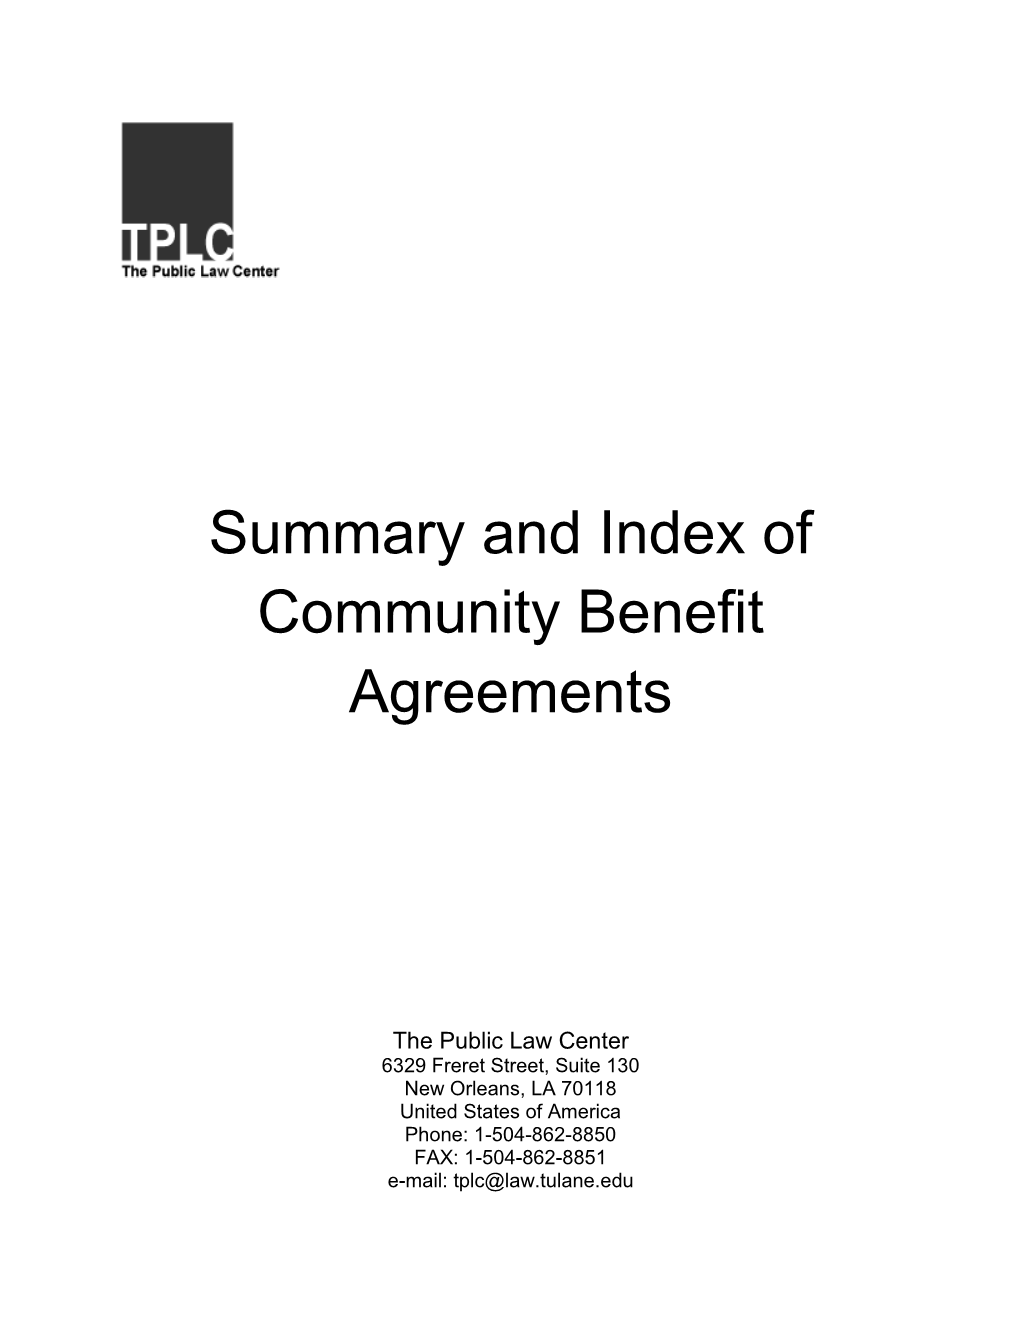 Summary and Index of Community Benefit Agreements